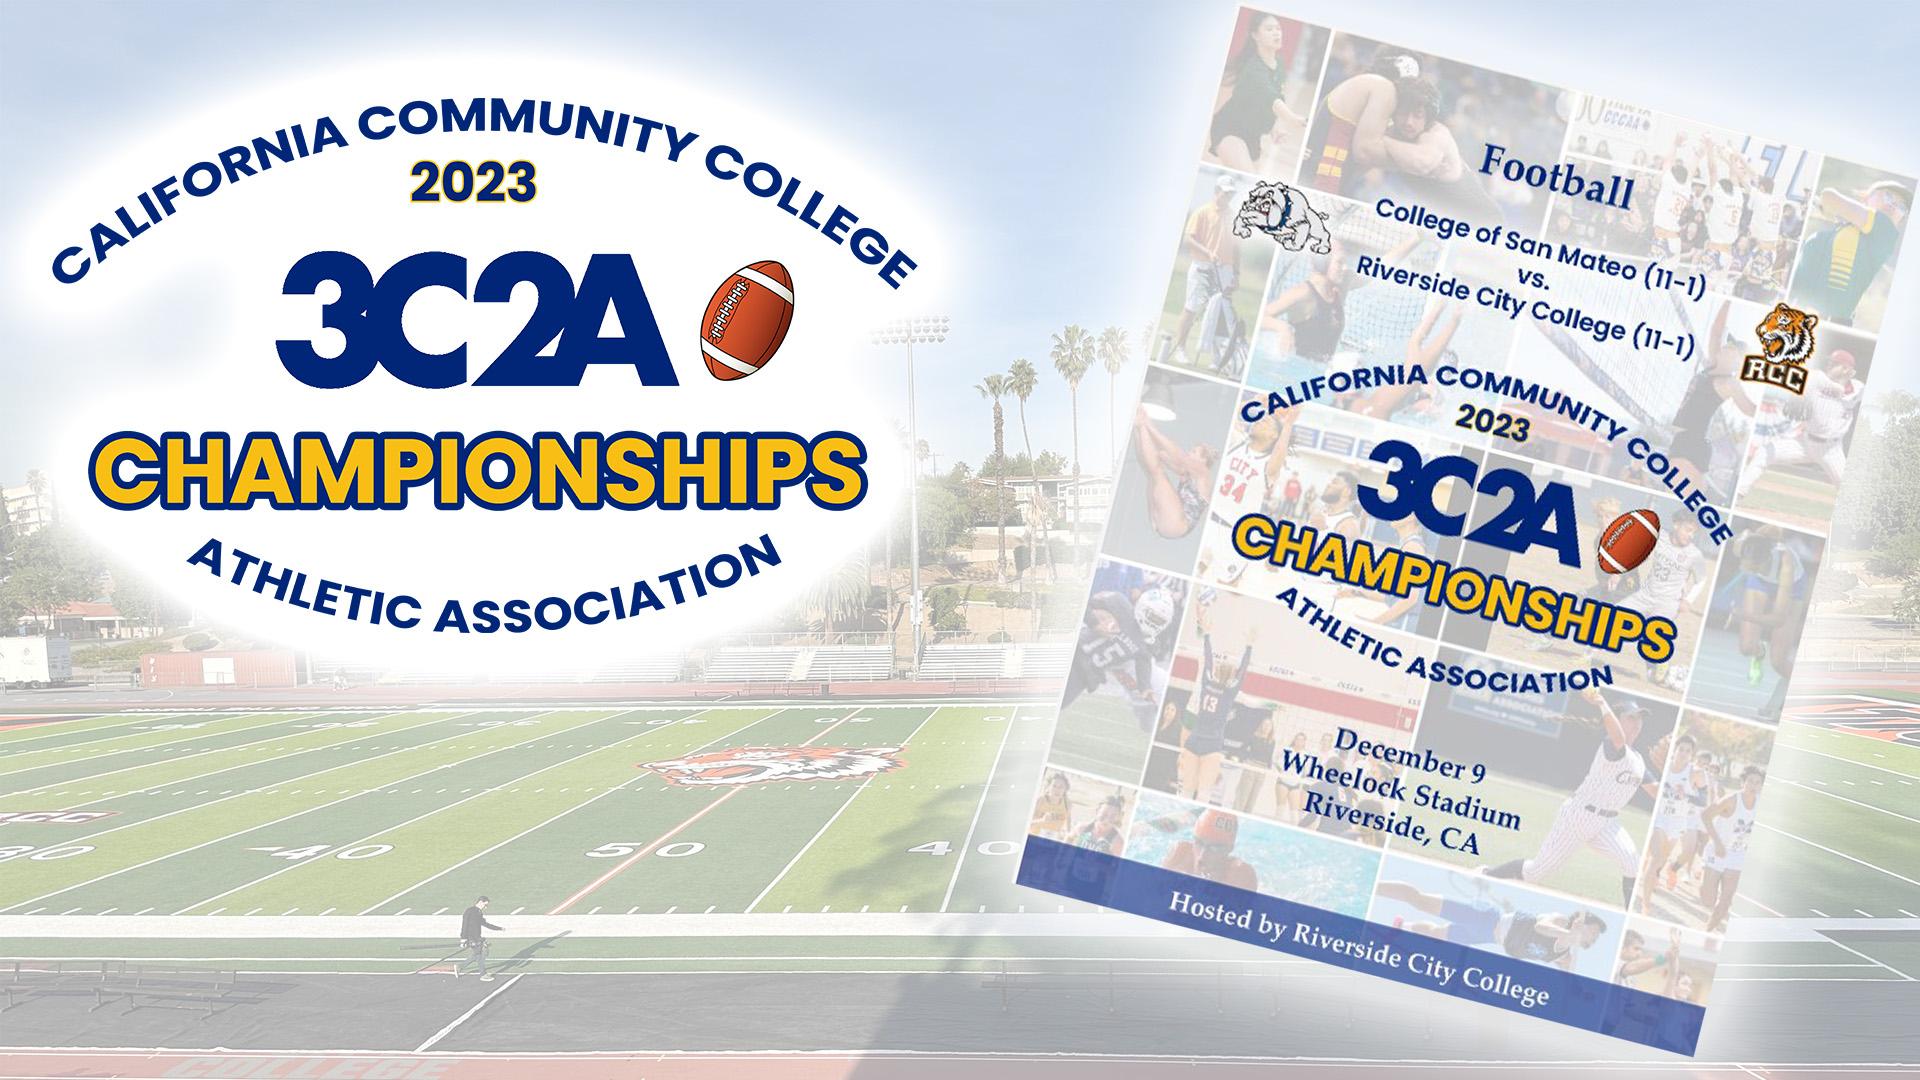 College of San Mateo and Riverside City set for rematch in 3C2A Football Championship